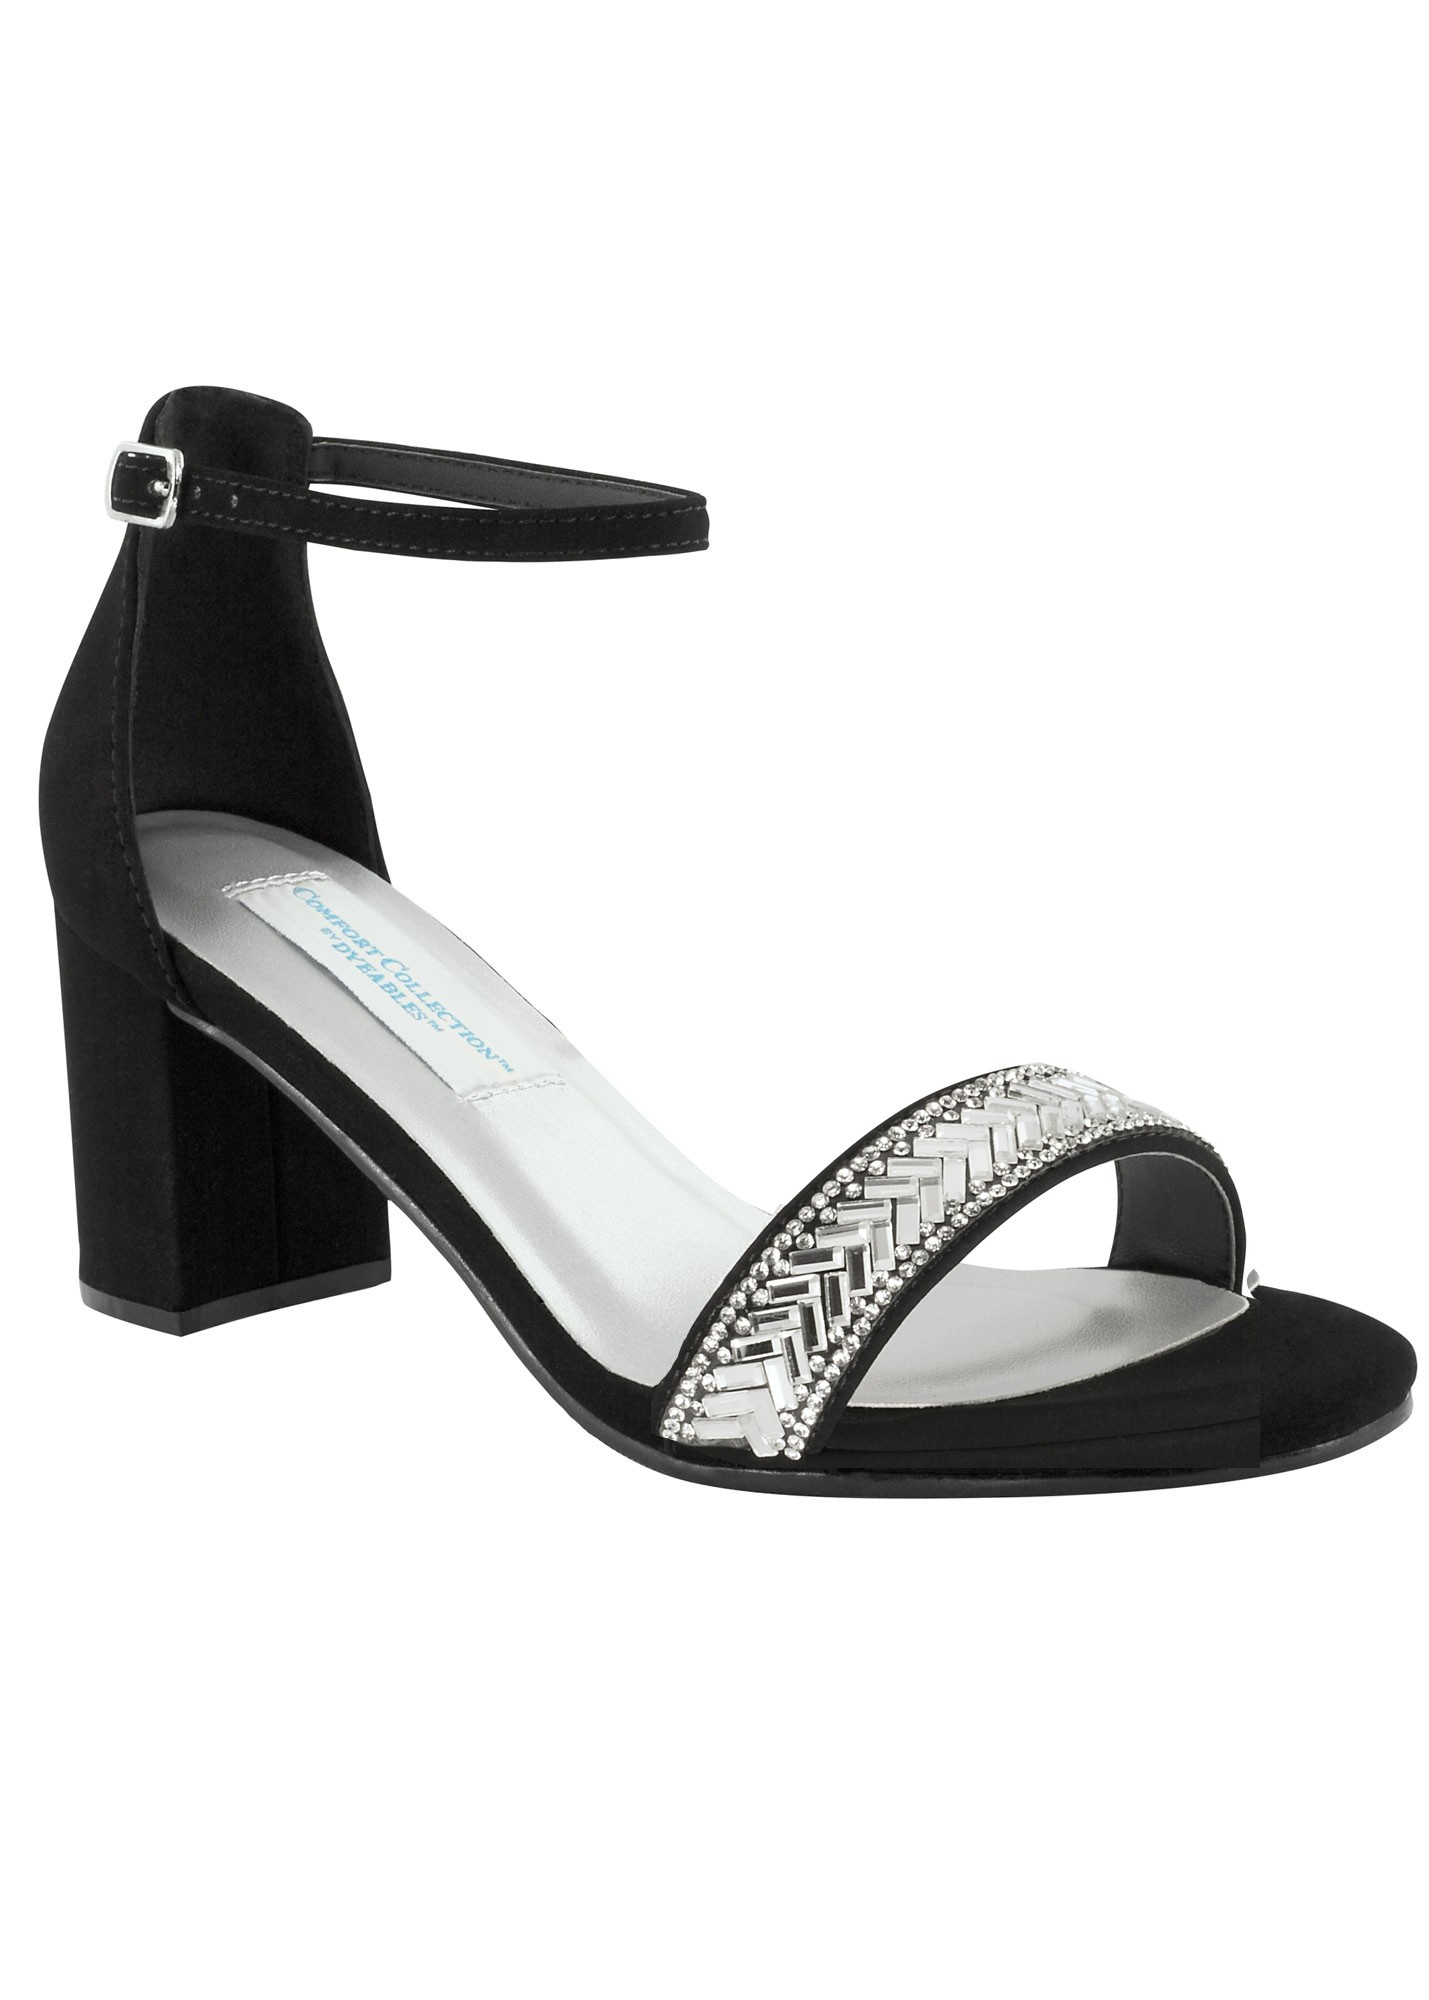 January by Dyeables Black Rhinestone Sandals with Block Heel